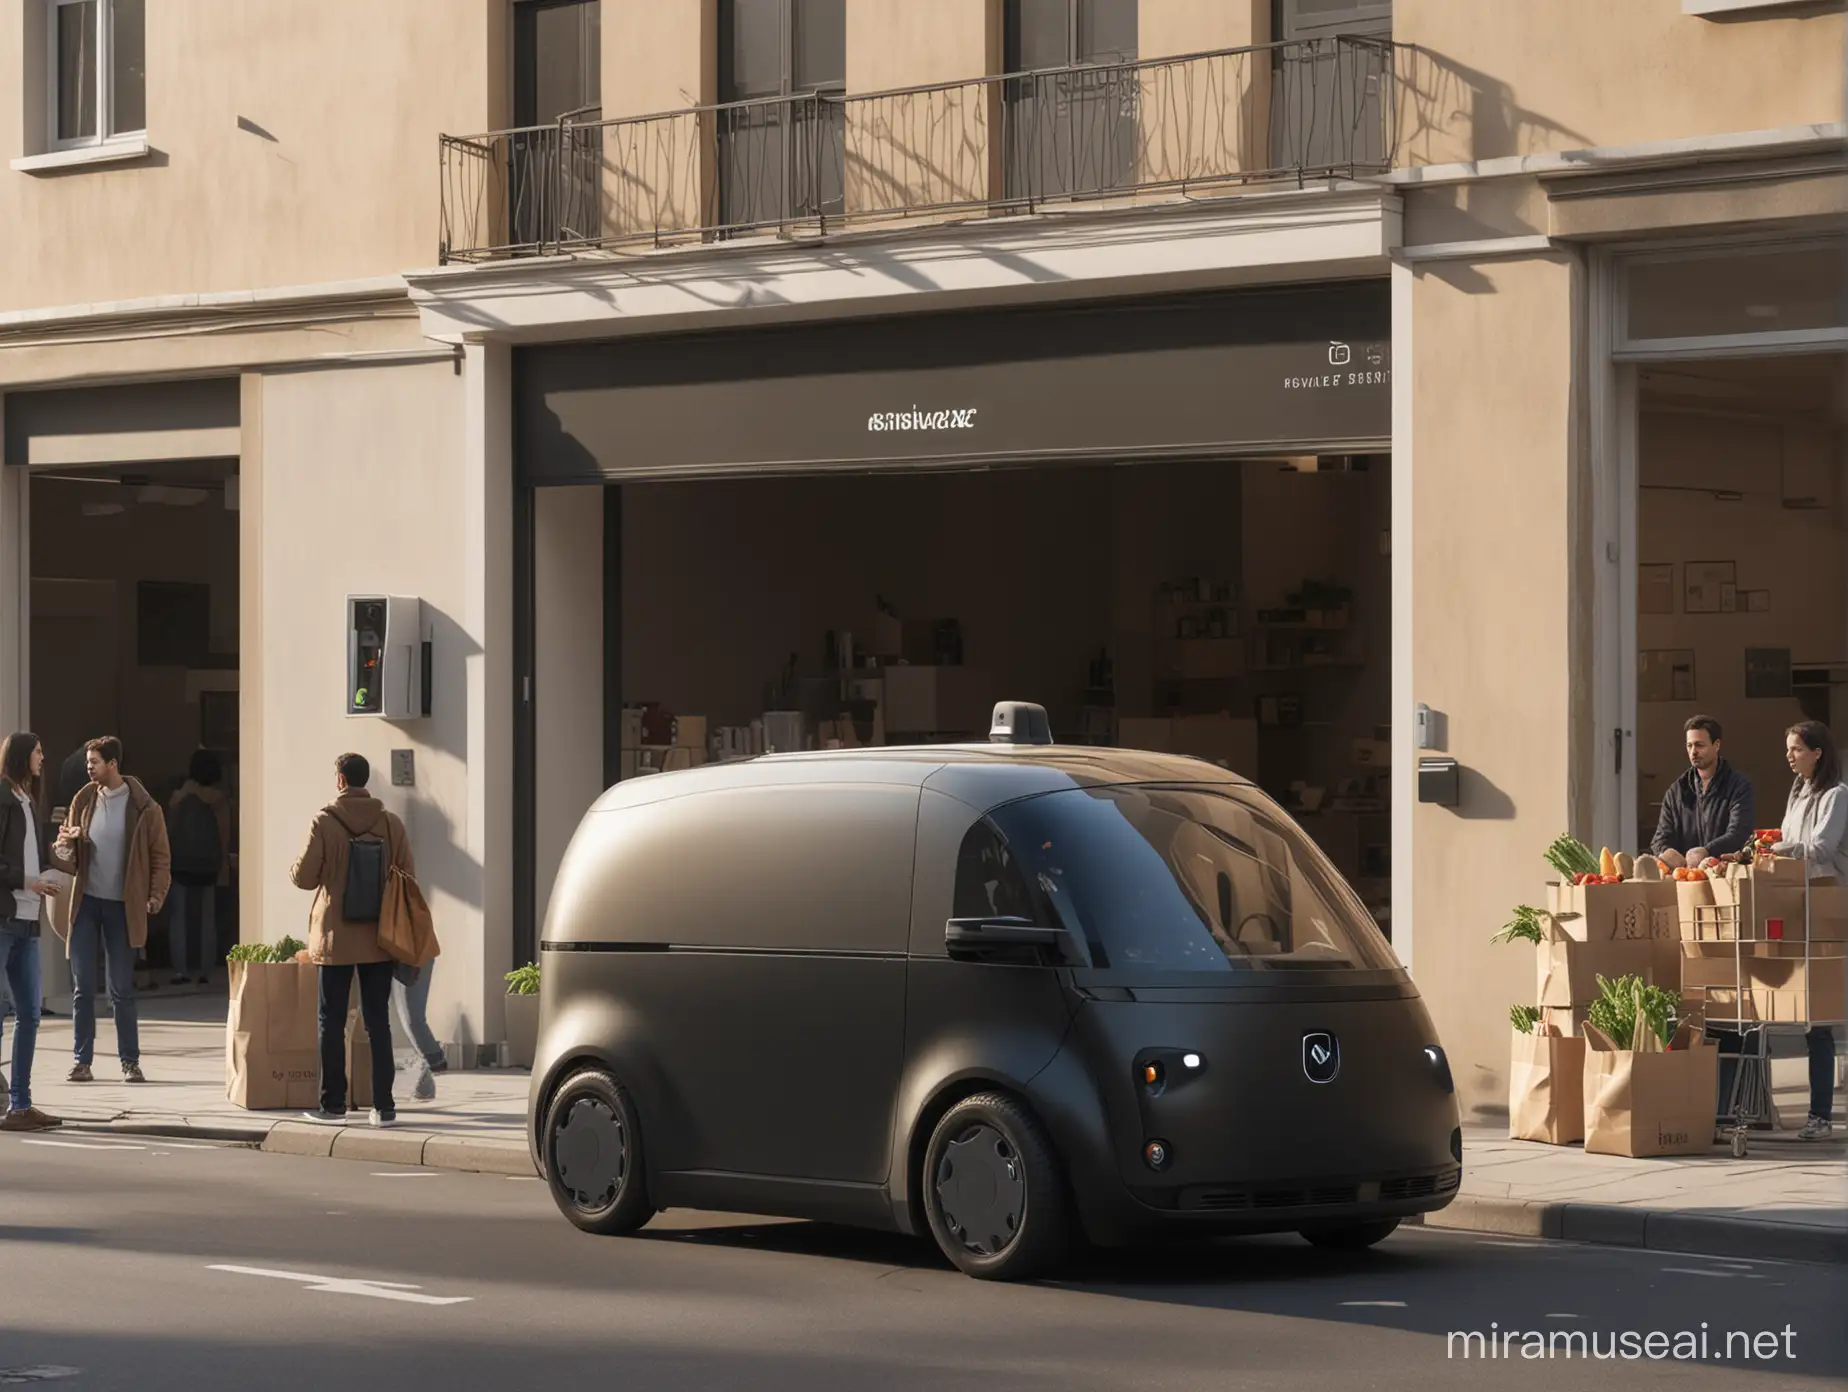 Silhouette of Autonomous Grocery Delivery Vehicle with Waiting Customers